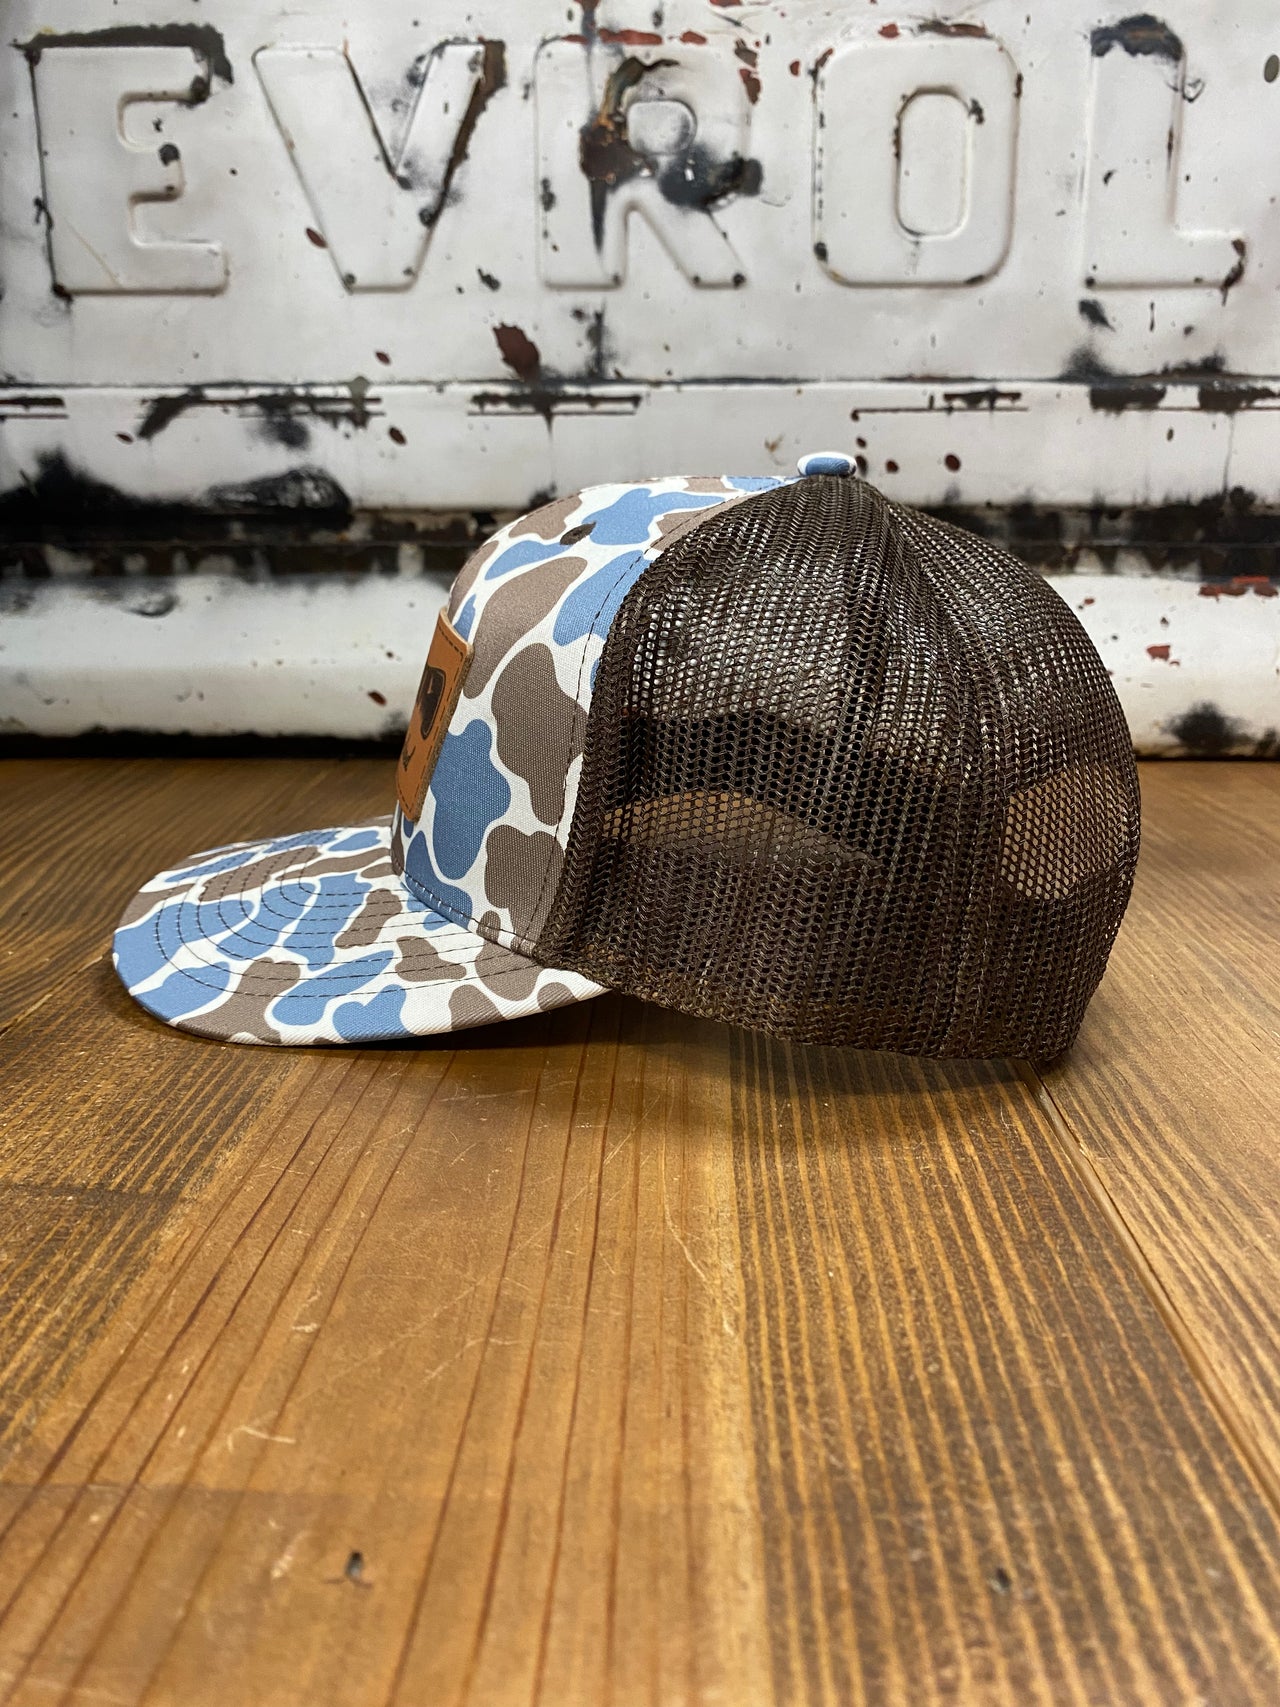 Fully Flocked Blue Old School Camo Snapback Hat featuring a richardson 112 trucker cap style, adorned with a leather patch showcasing elegant flying mallards. The blue old school camo print and brown mesh snapback create a perfect blend of classic and contemporary outdoor fashion.